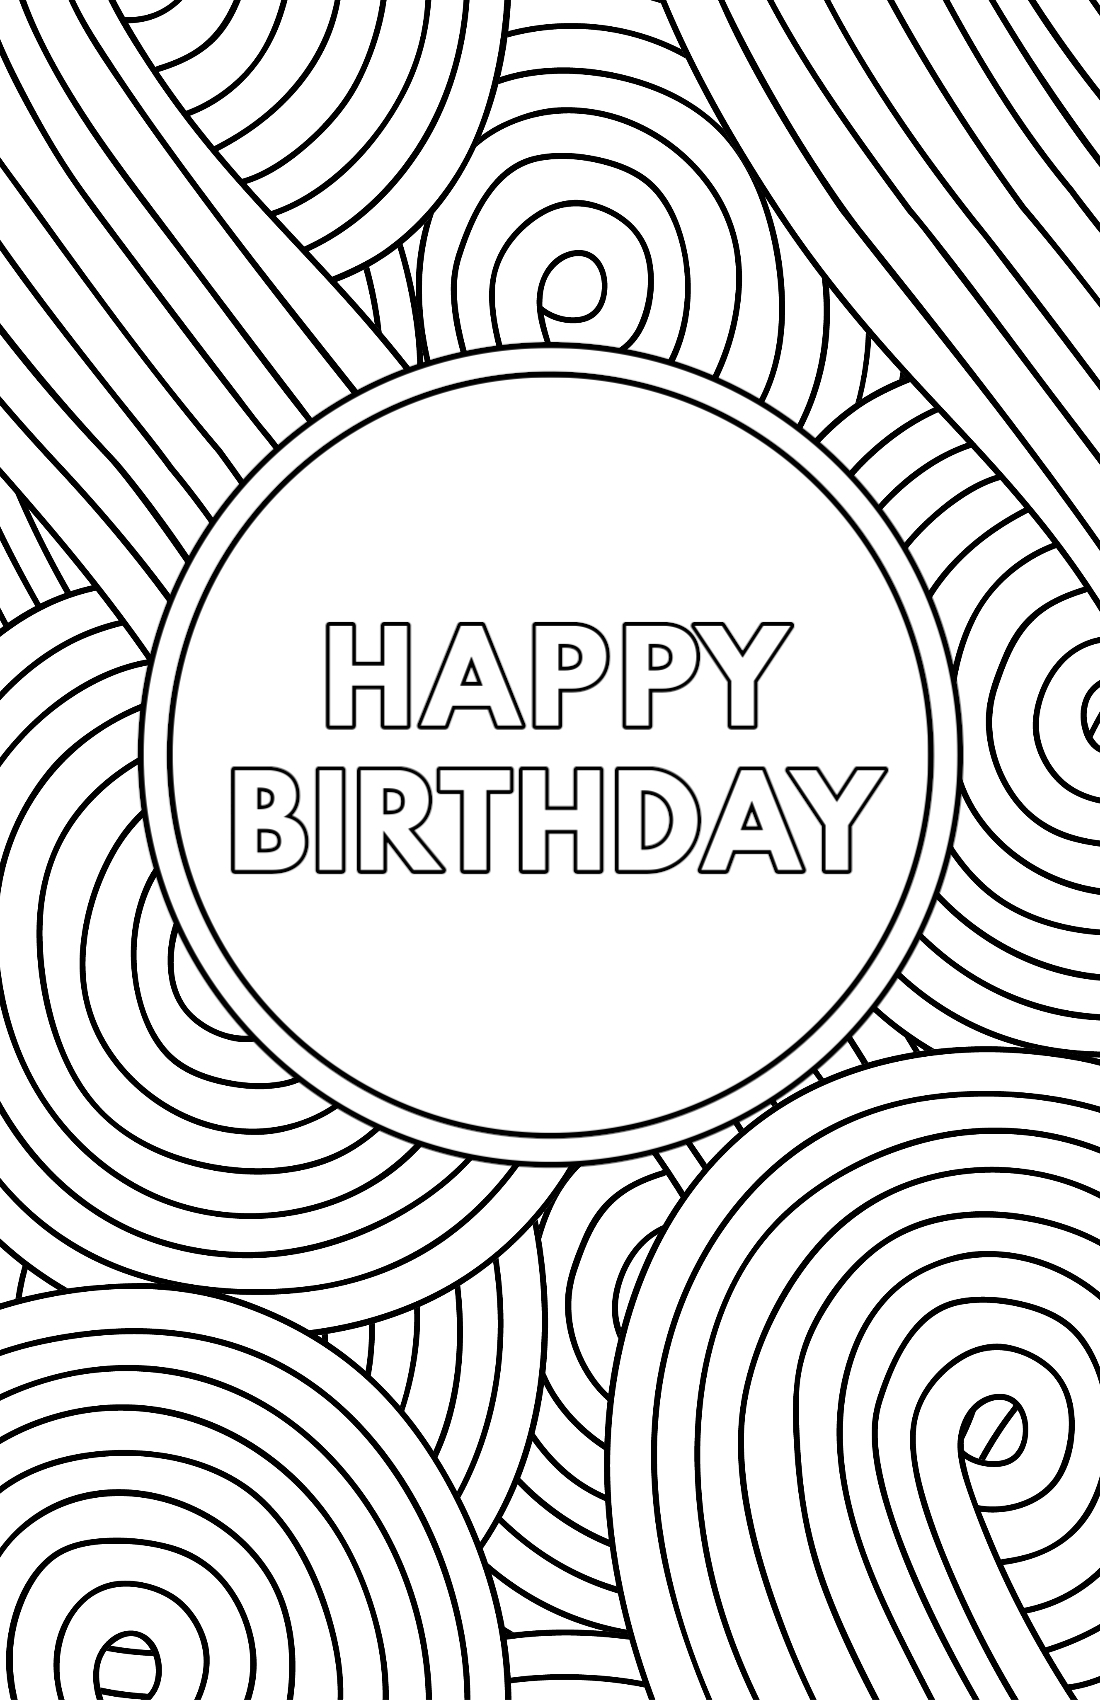 Free Printable Birthday Cards - Paper Trail Design Within Foldable Birthday Card Template